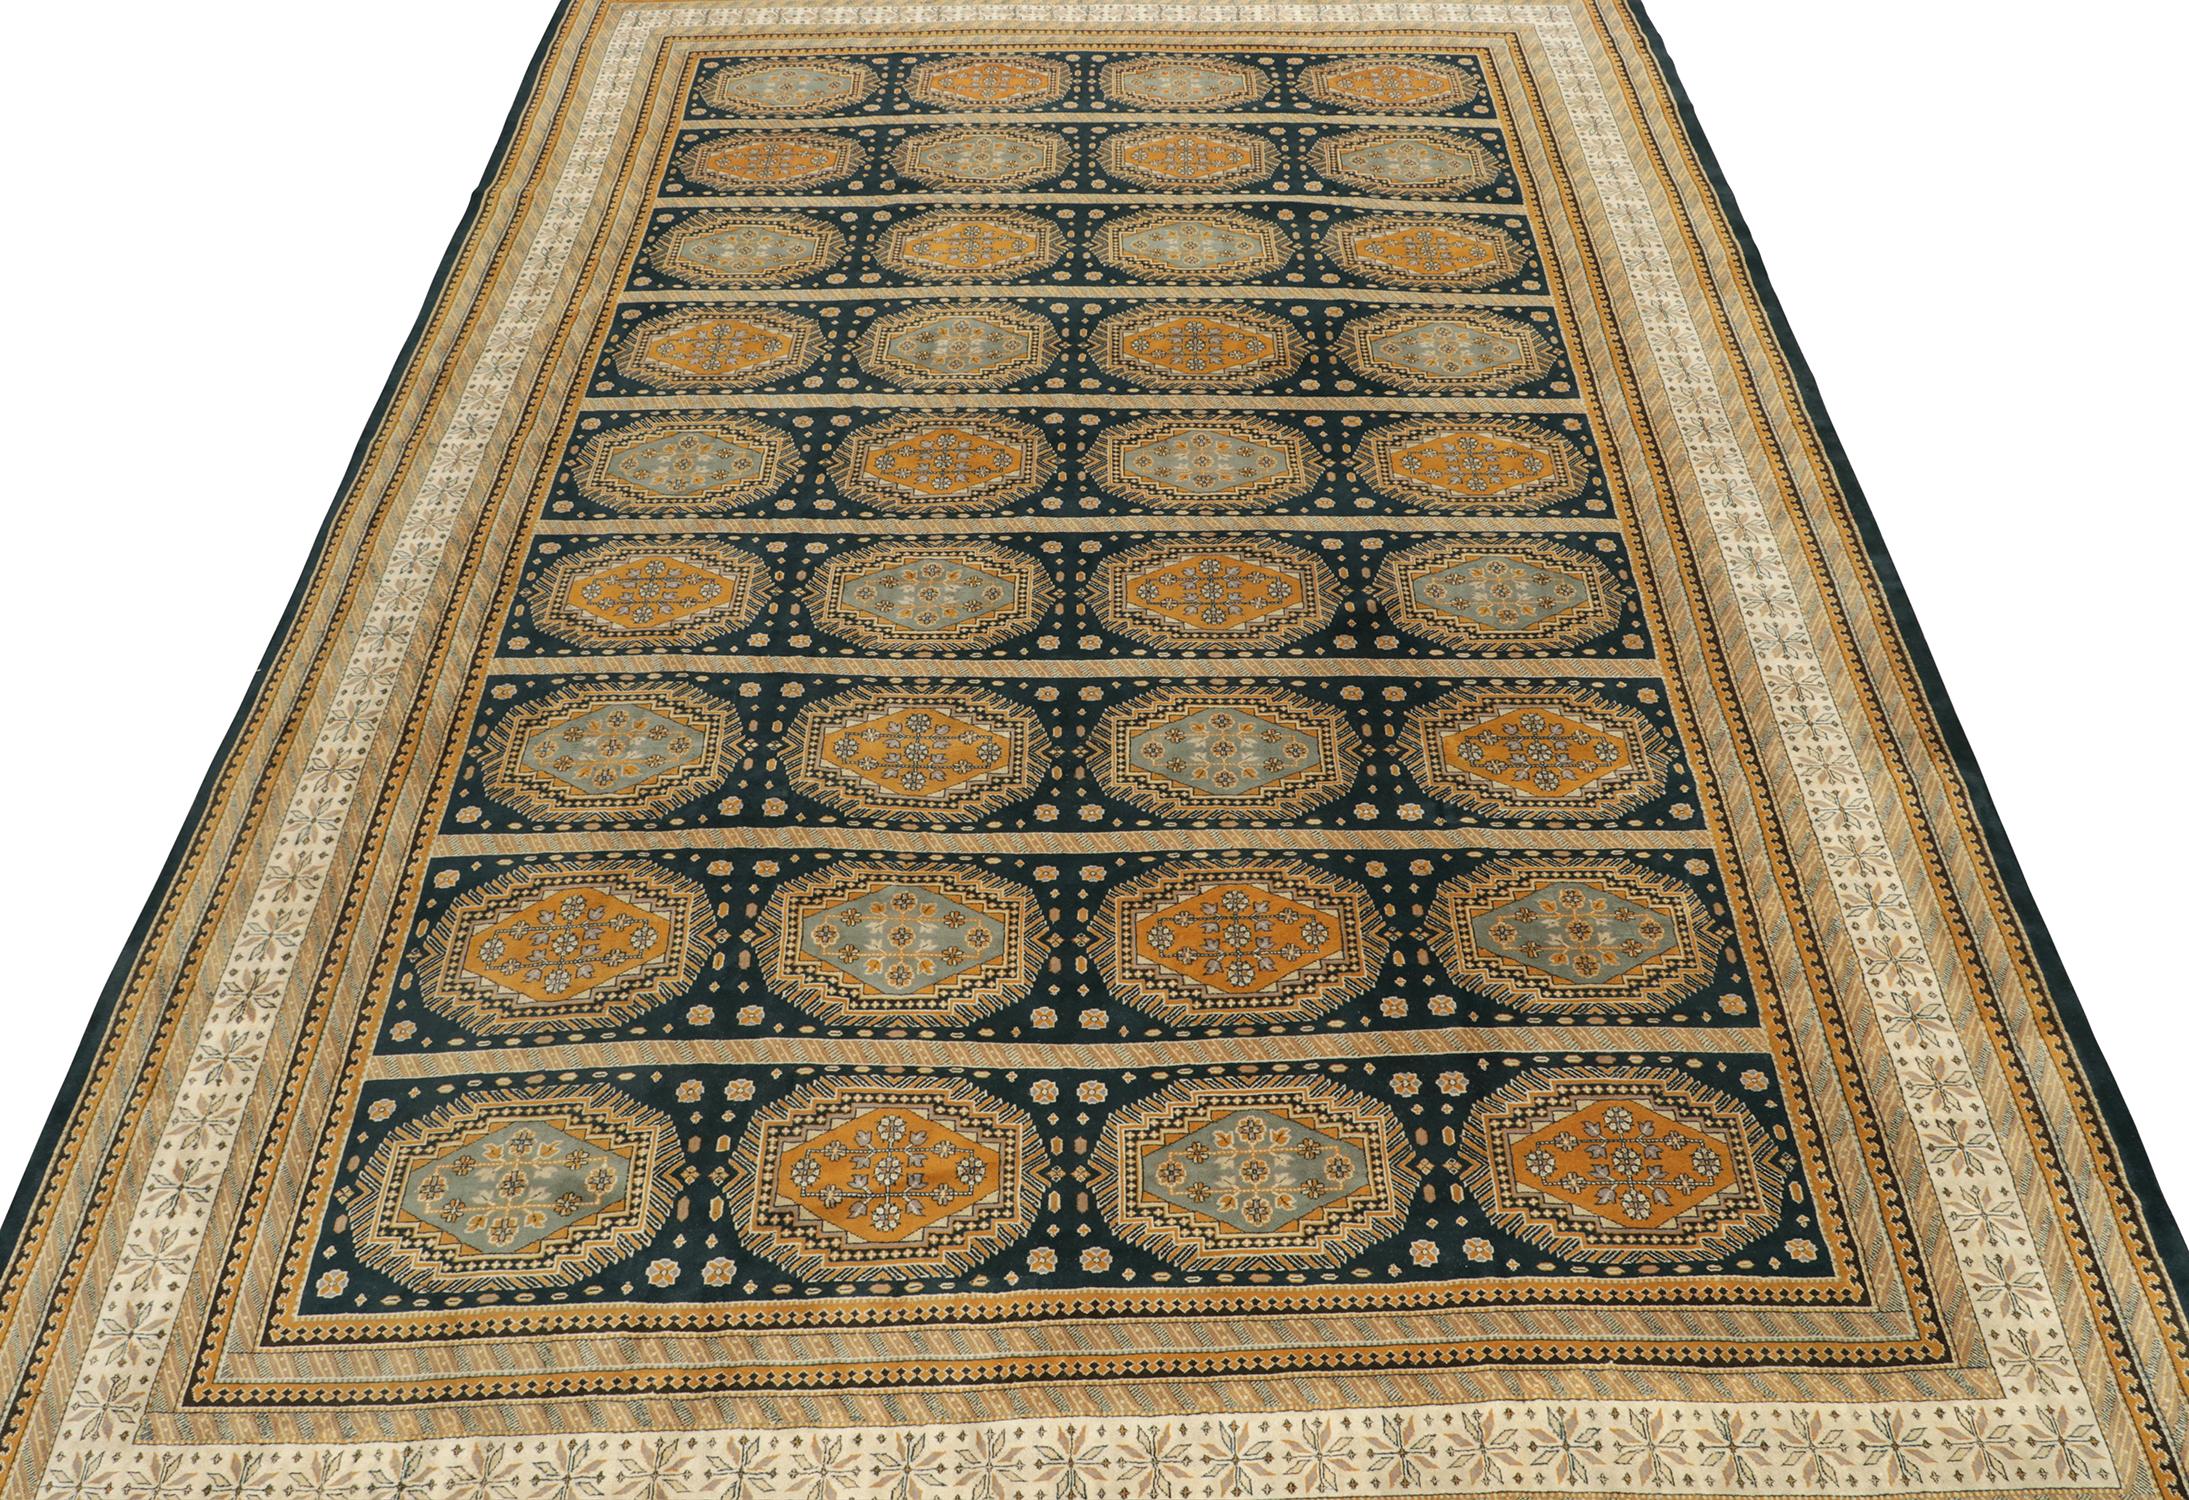 A rare antique 12x18 Agra rug in blue and gold, hand knotted in wool circa 1910-1920.

Further on the Design:

This particular Agra is a rare production in regal colors, meticulous details, and grand large size like few others. Likewise, such warm